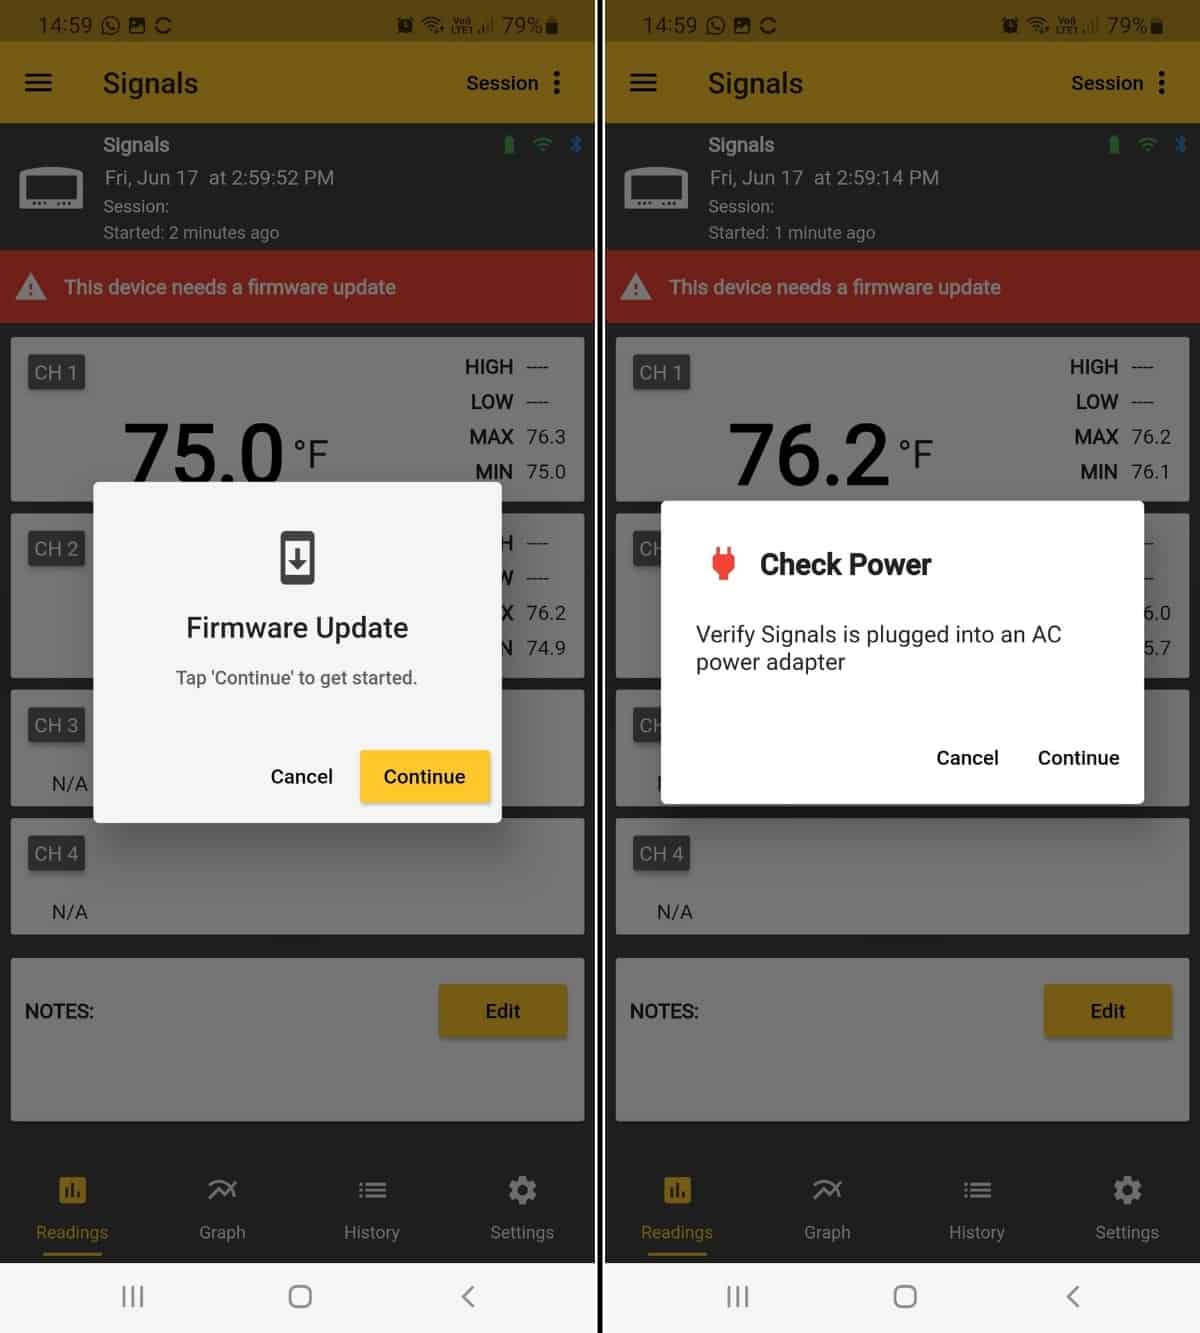 Thermoworks app screenshots showing the firmware update process, stages 1 and 2